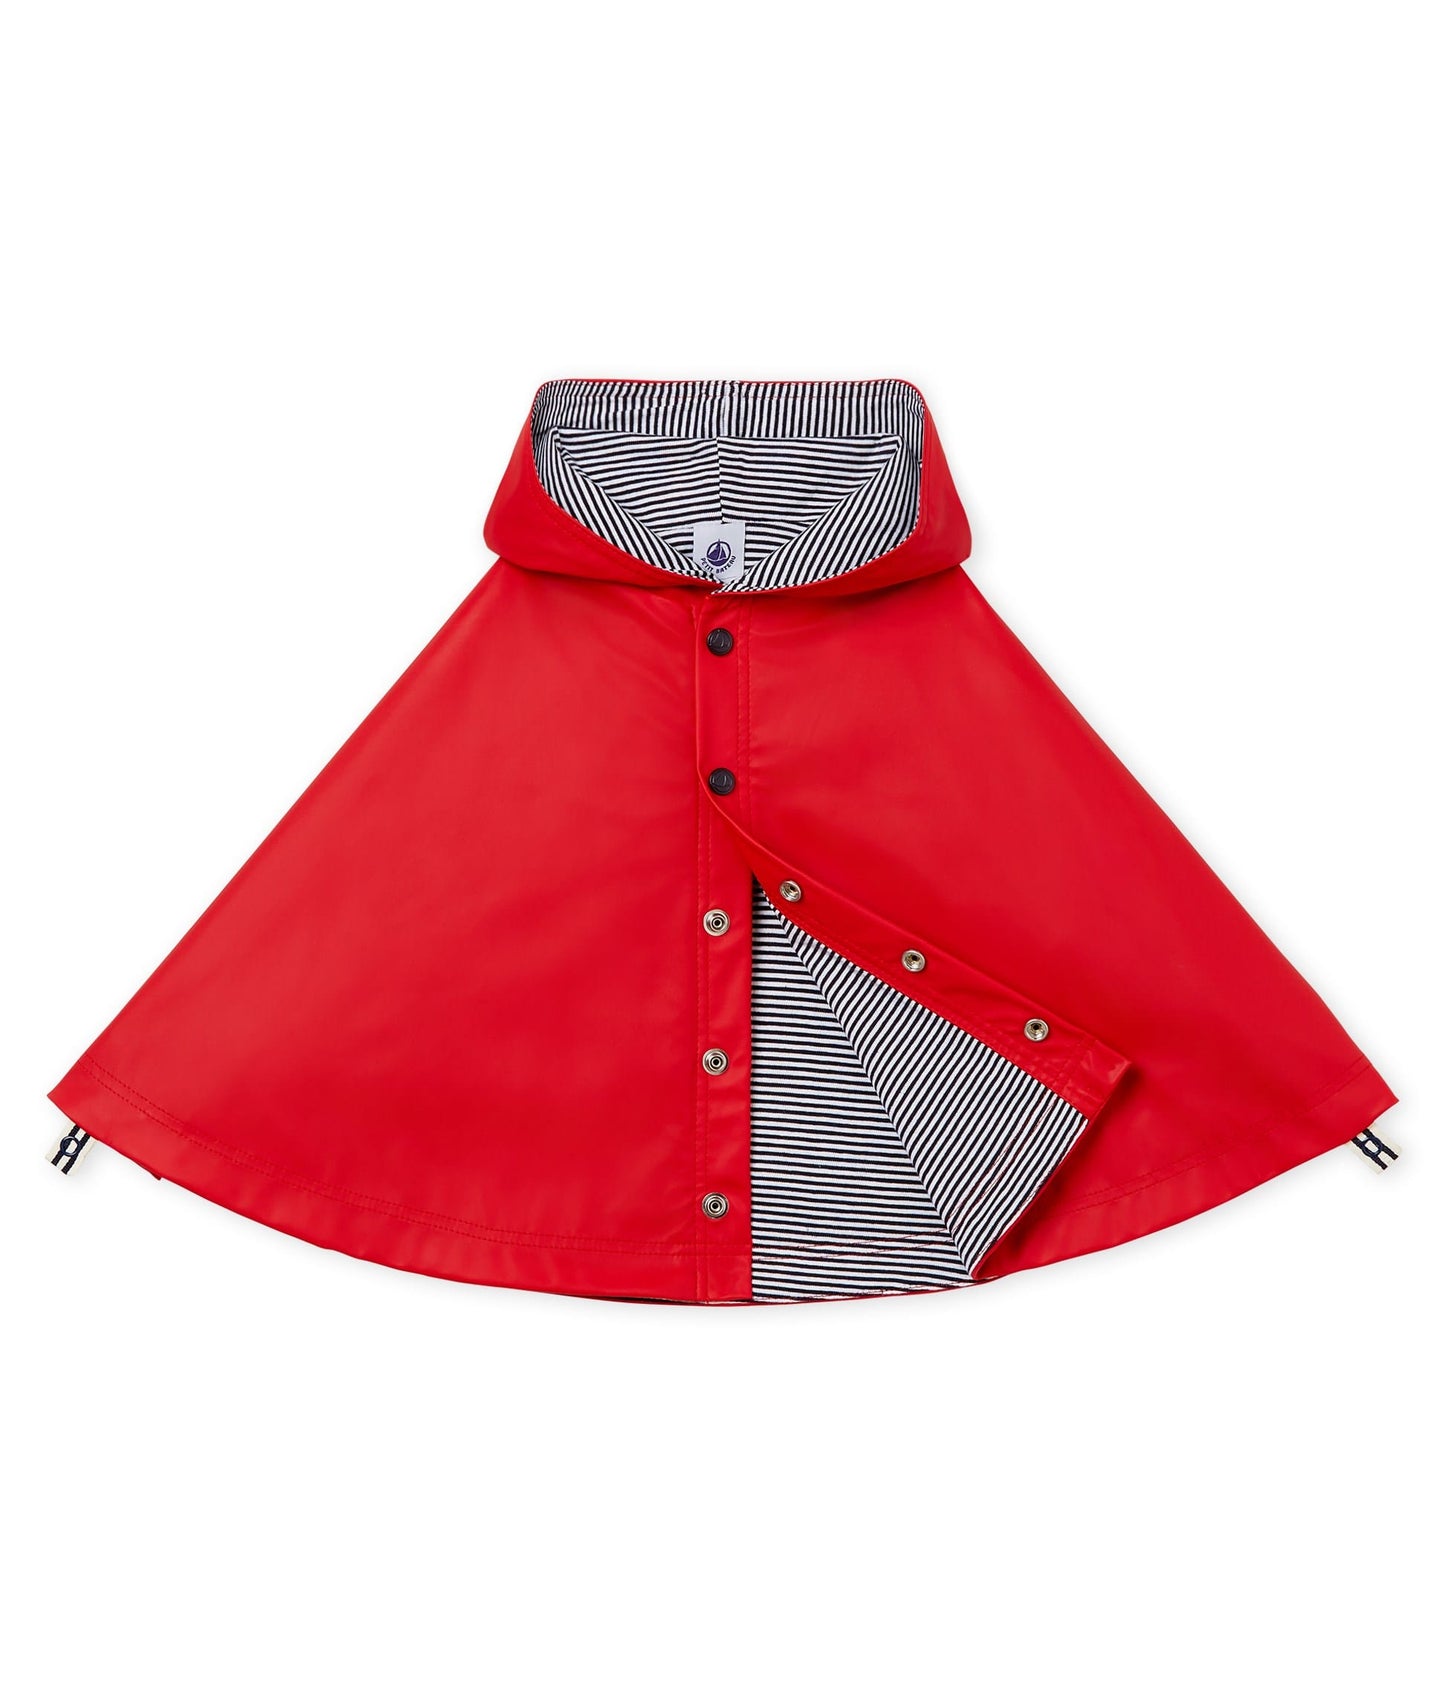 Petit Bateau Baby Rain Cape Red (One Size, fits babies up to 3Y)